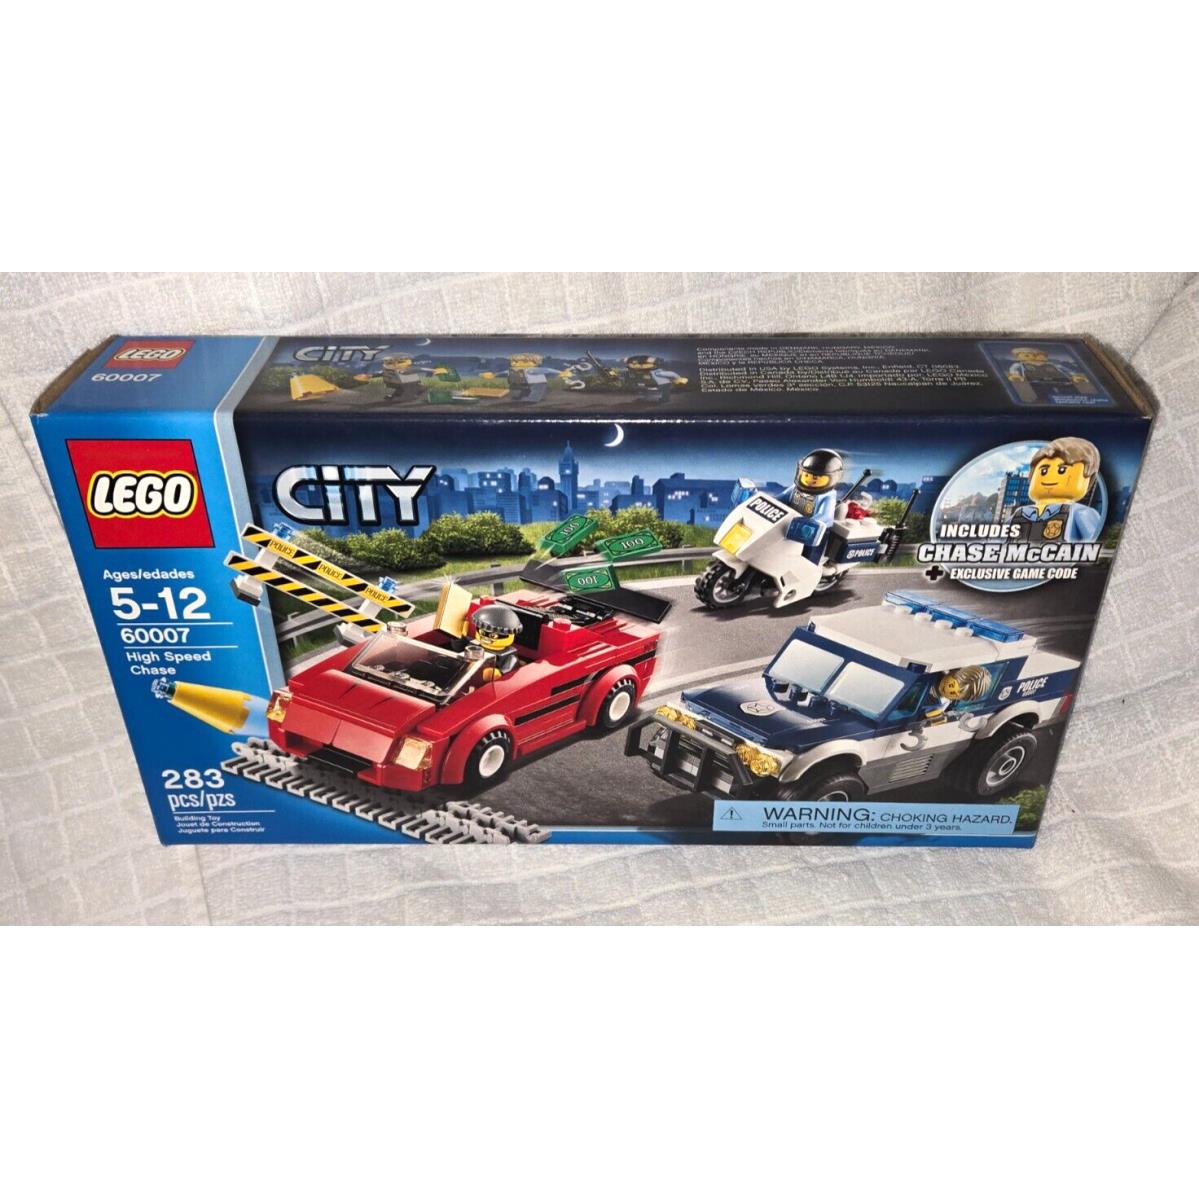 City Lego 60007 Police High Speed Chase Set Cop Chase Mccain Retired